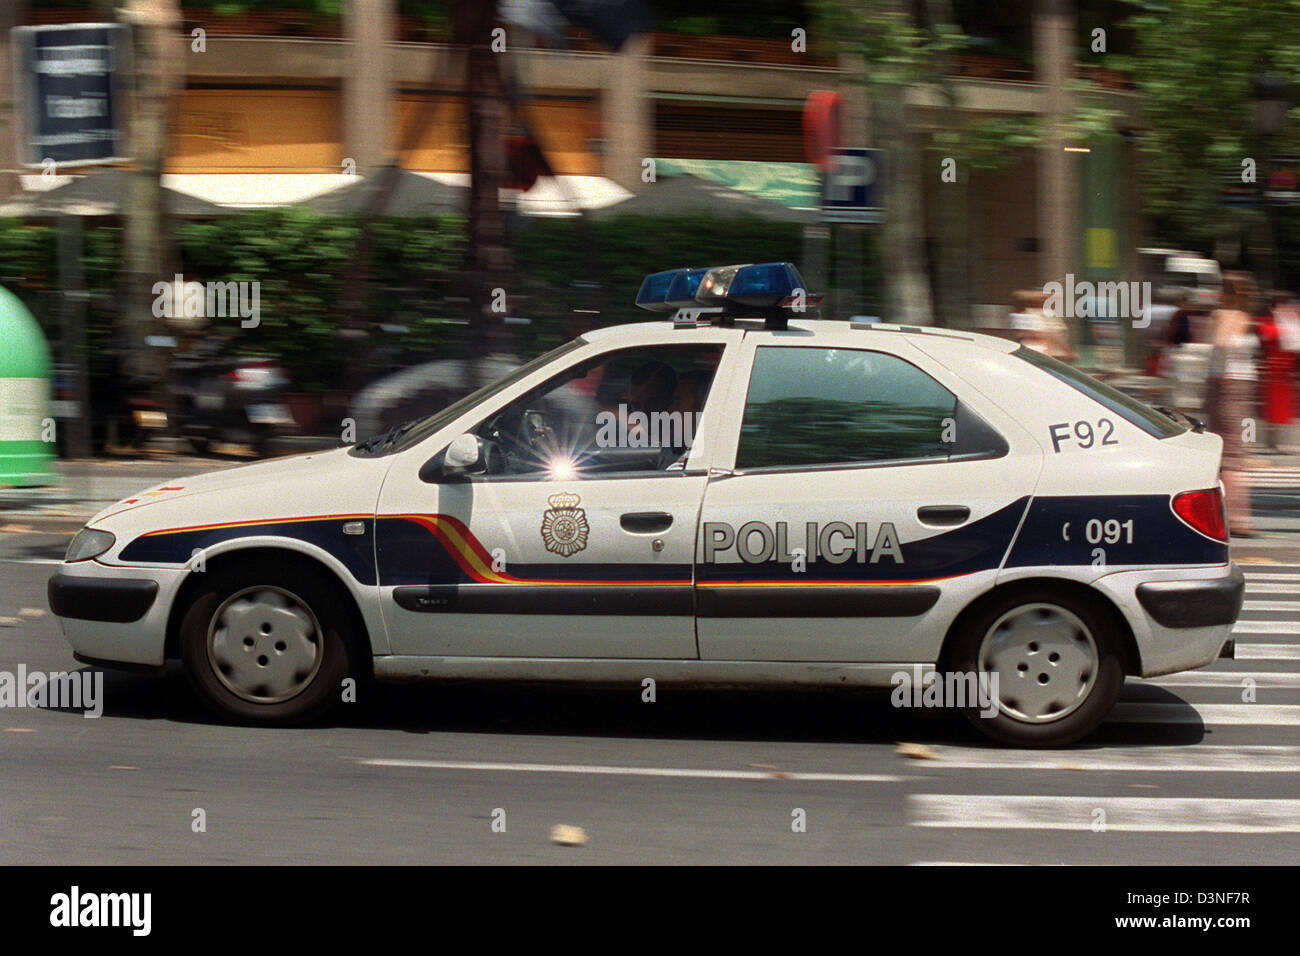 (FILE) The picture shows a police car of the self-governed Catalan police Mossos dÂEsquadra, Barcelona, Spain, 15 June 2002. The Mossos dÂEsquadra is in charge for generals' buildings and premises in the city, while the municipal Guárdia Urbana is responsible for traffic. Photo: Thorsten Lang Stock Photo